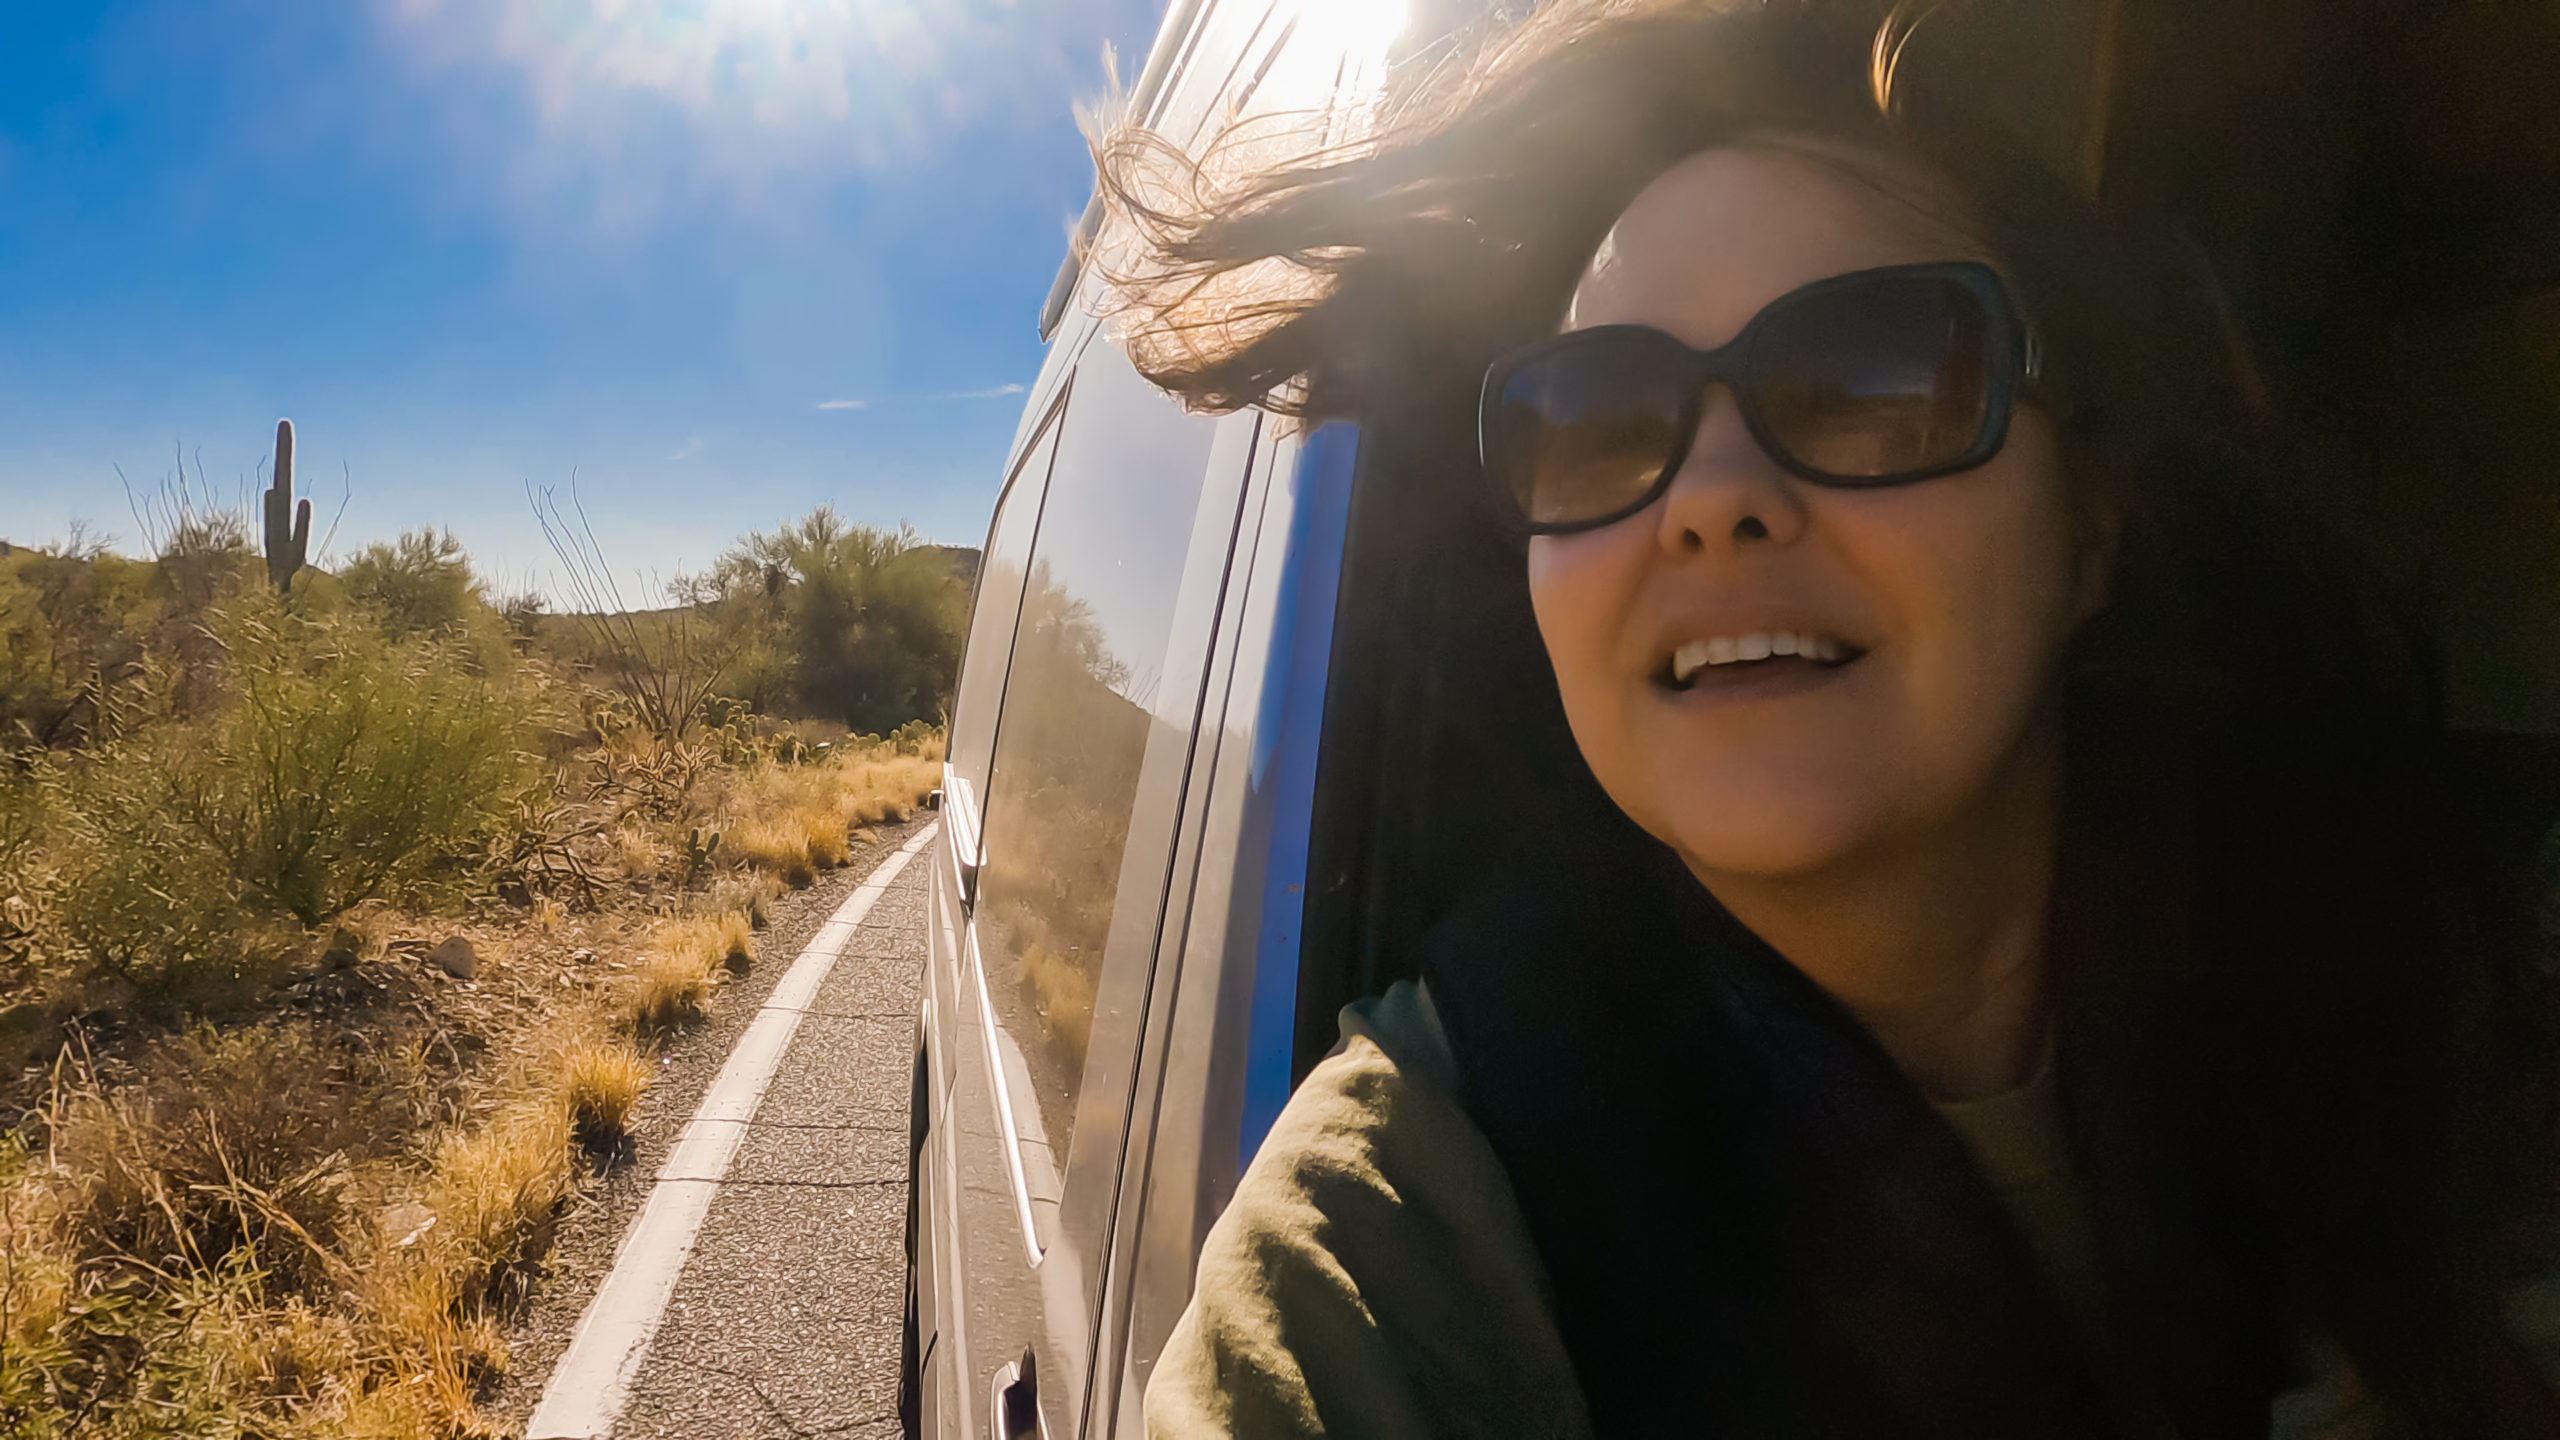 woman with her head out the passenger window ofa campervan, wind blowing her hair, with the road and cacti in the background. road trip apps